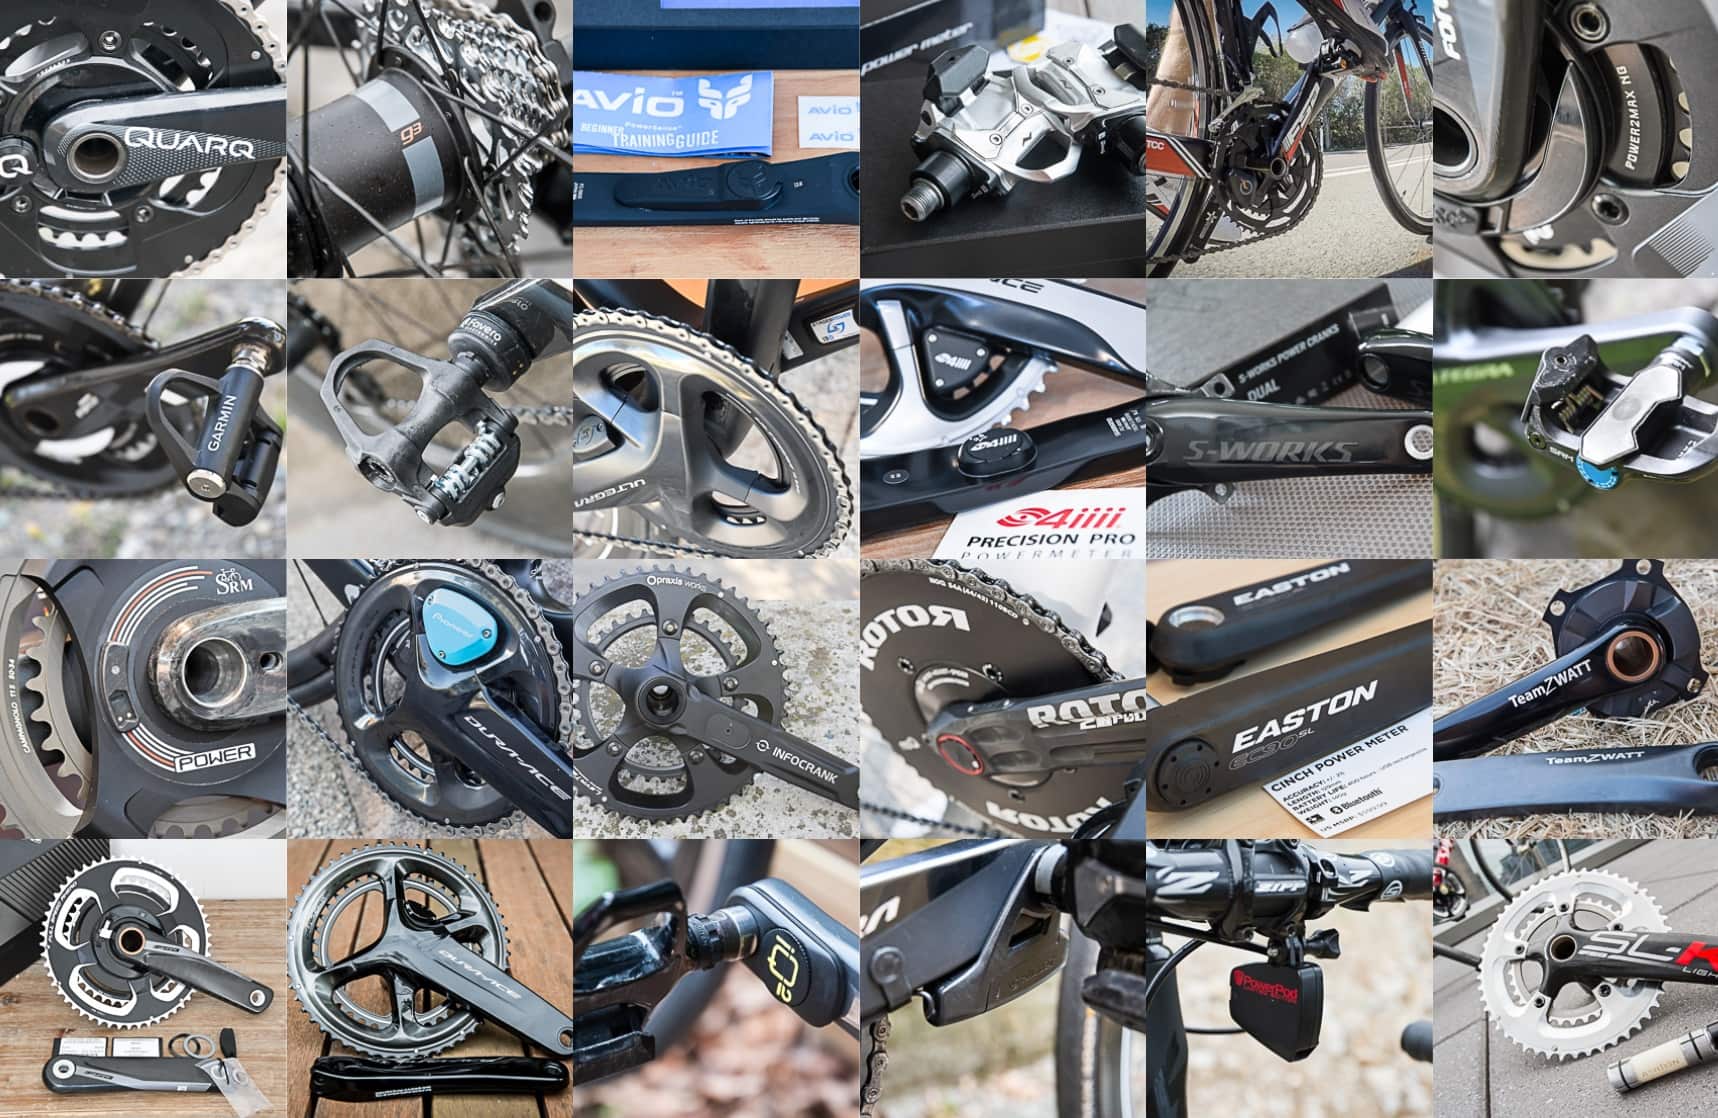 stages power meter uk